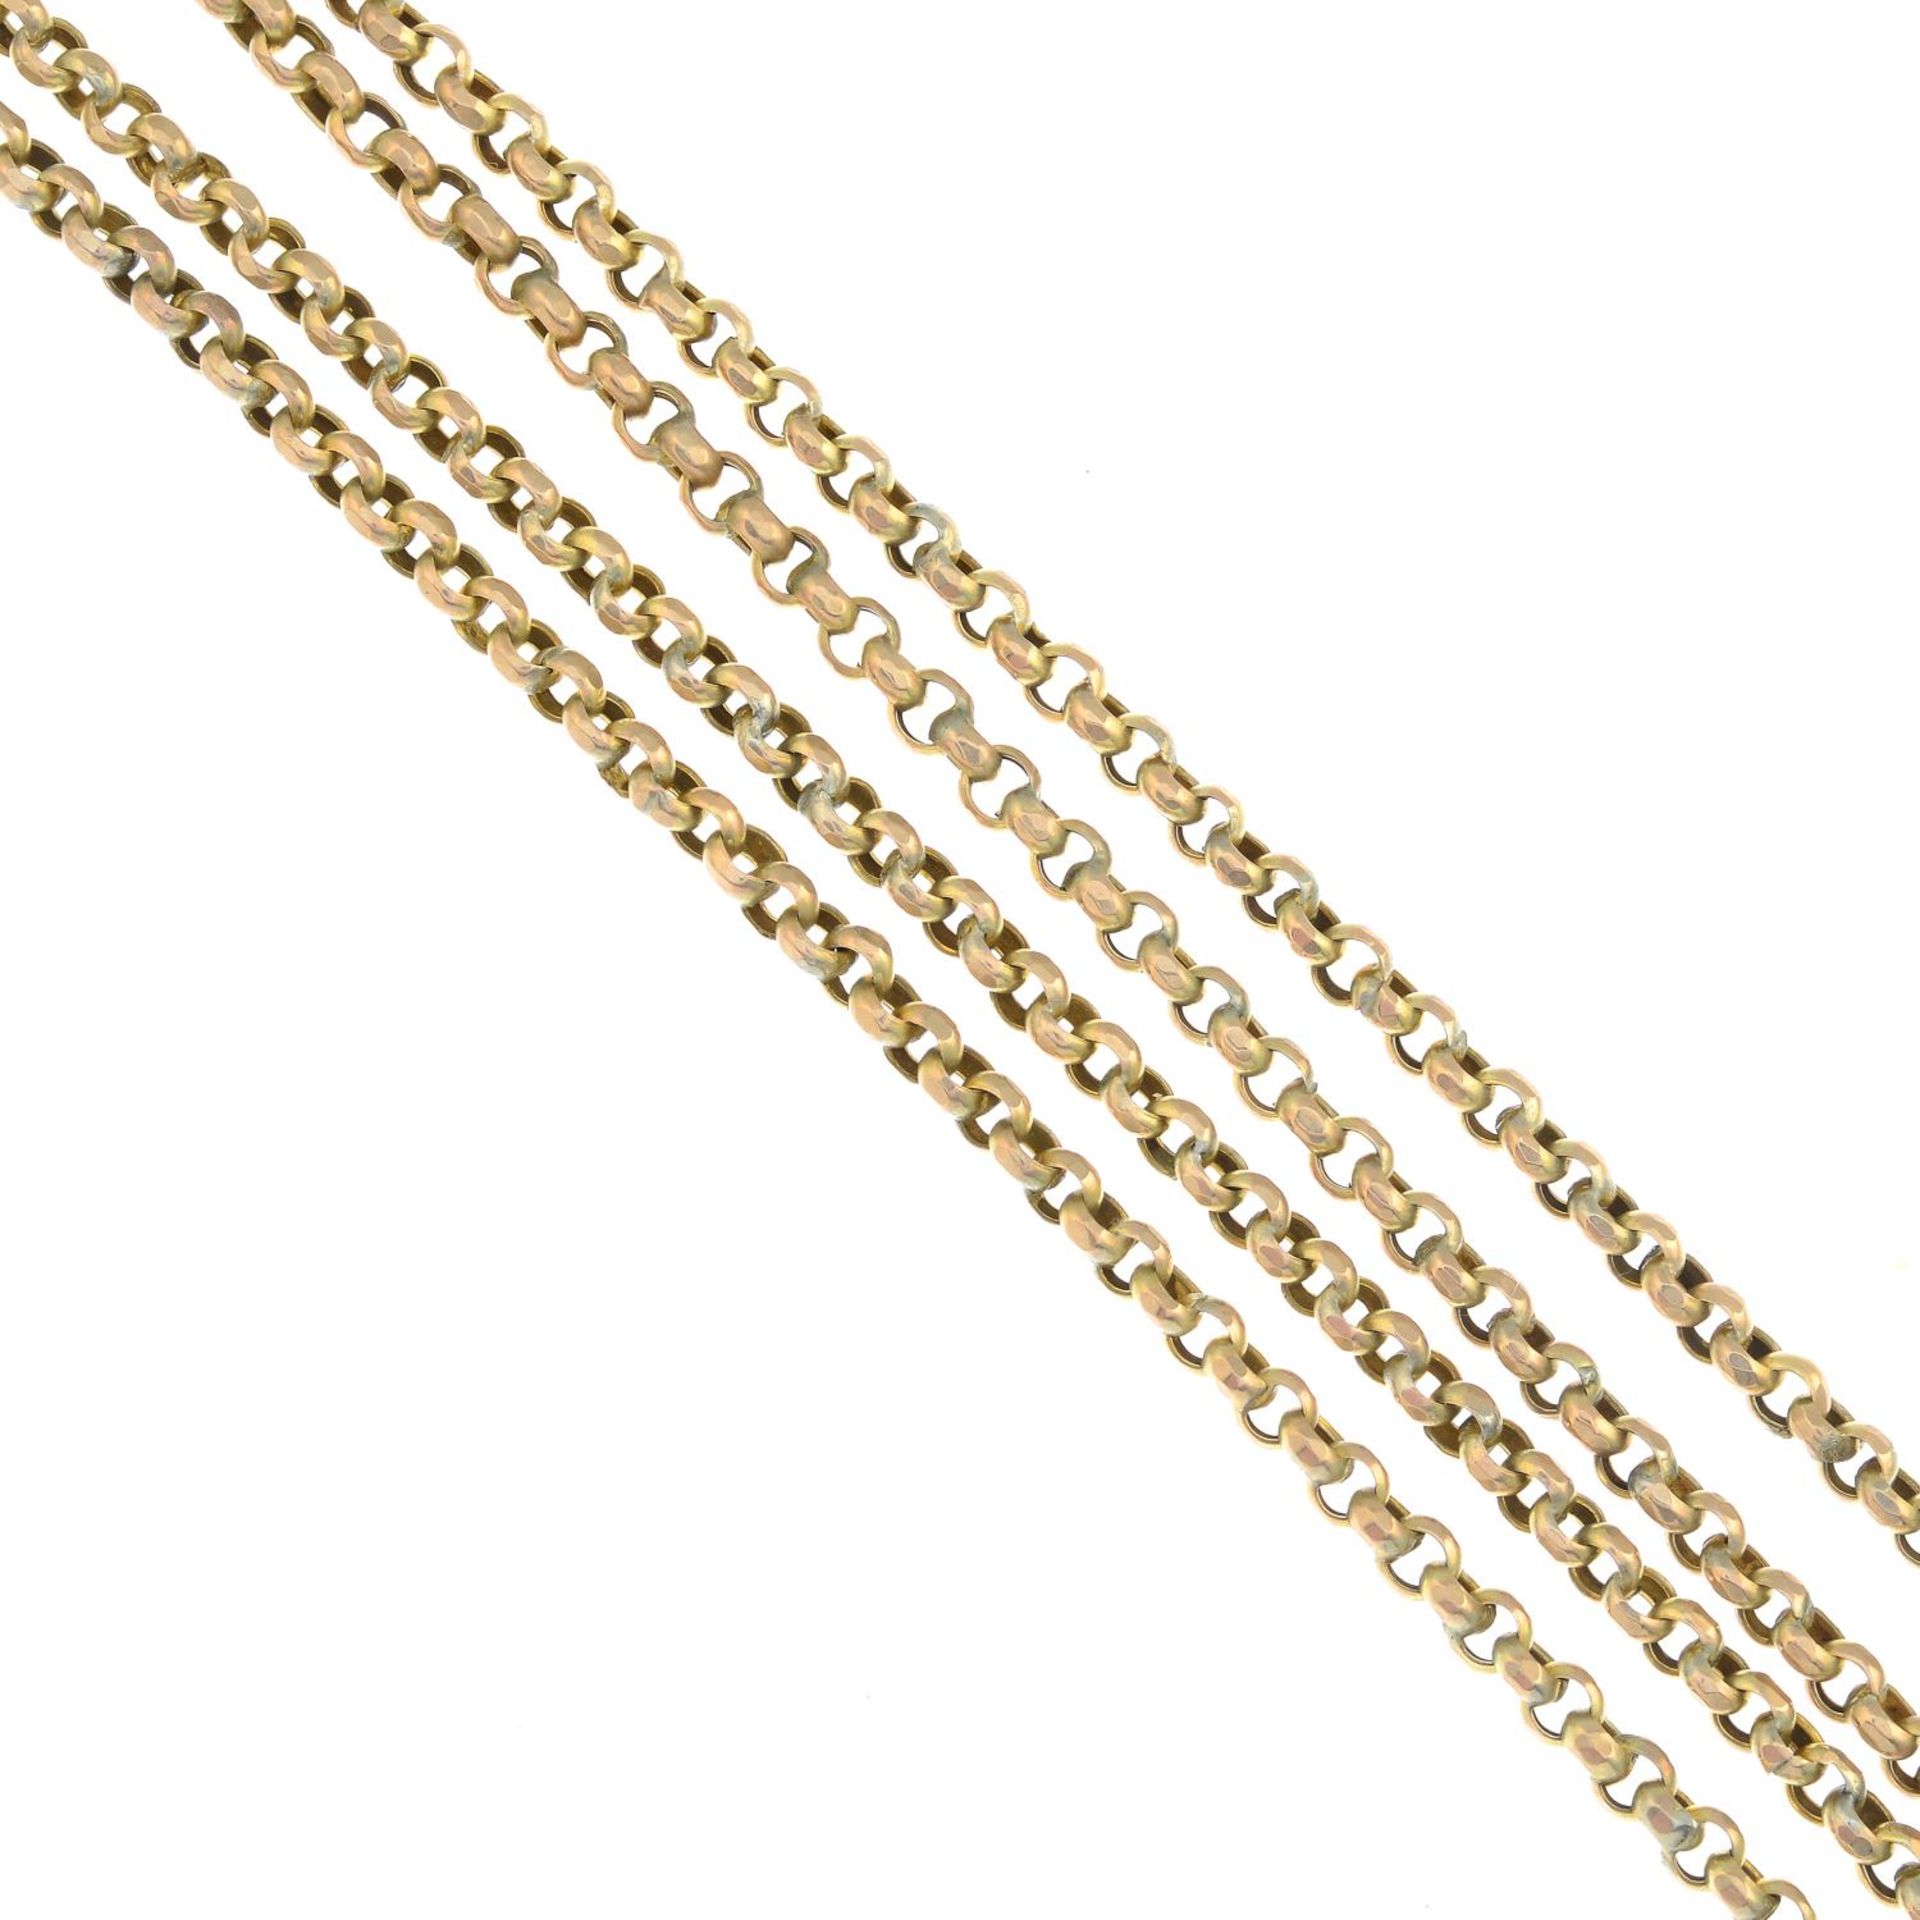 An early 20th century 9ct gold longuard chain, with lobster clasp.Stamped 9ct.